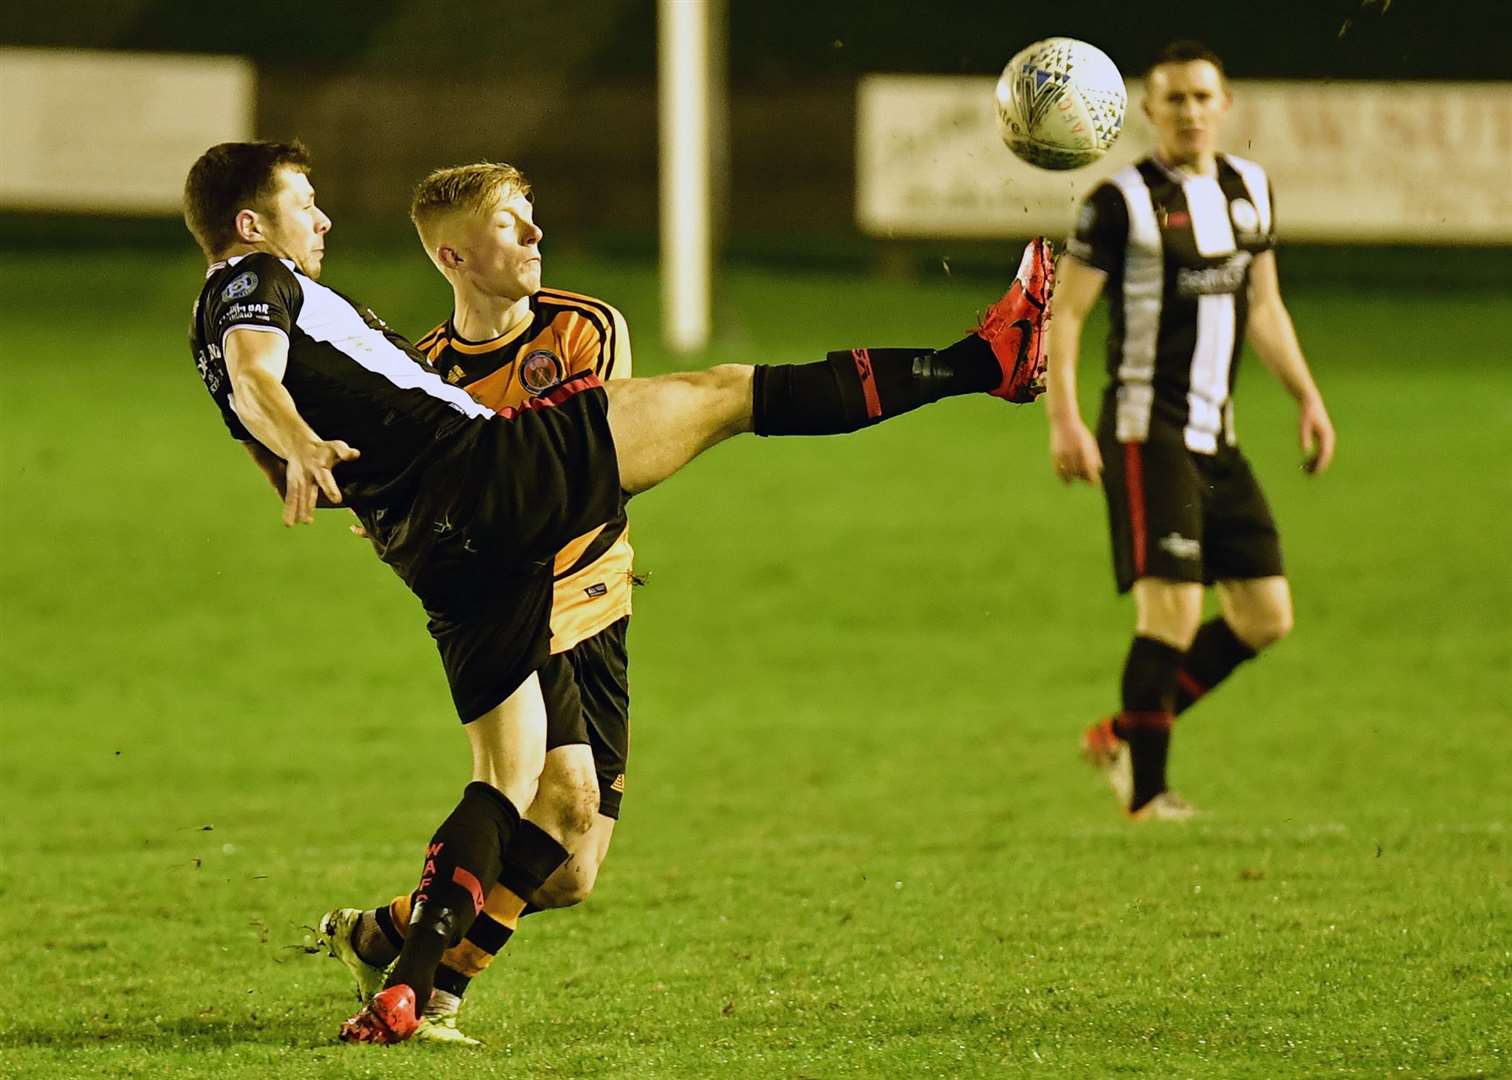 Jack Henry of Wick Academy at full strength to reach the ball ahead of Fort William's Ross Gunn. Picture: Mel Roger